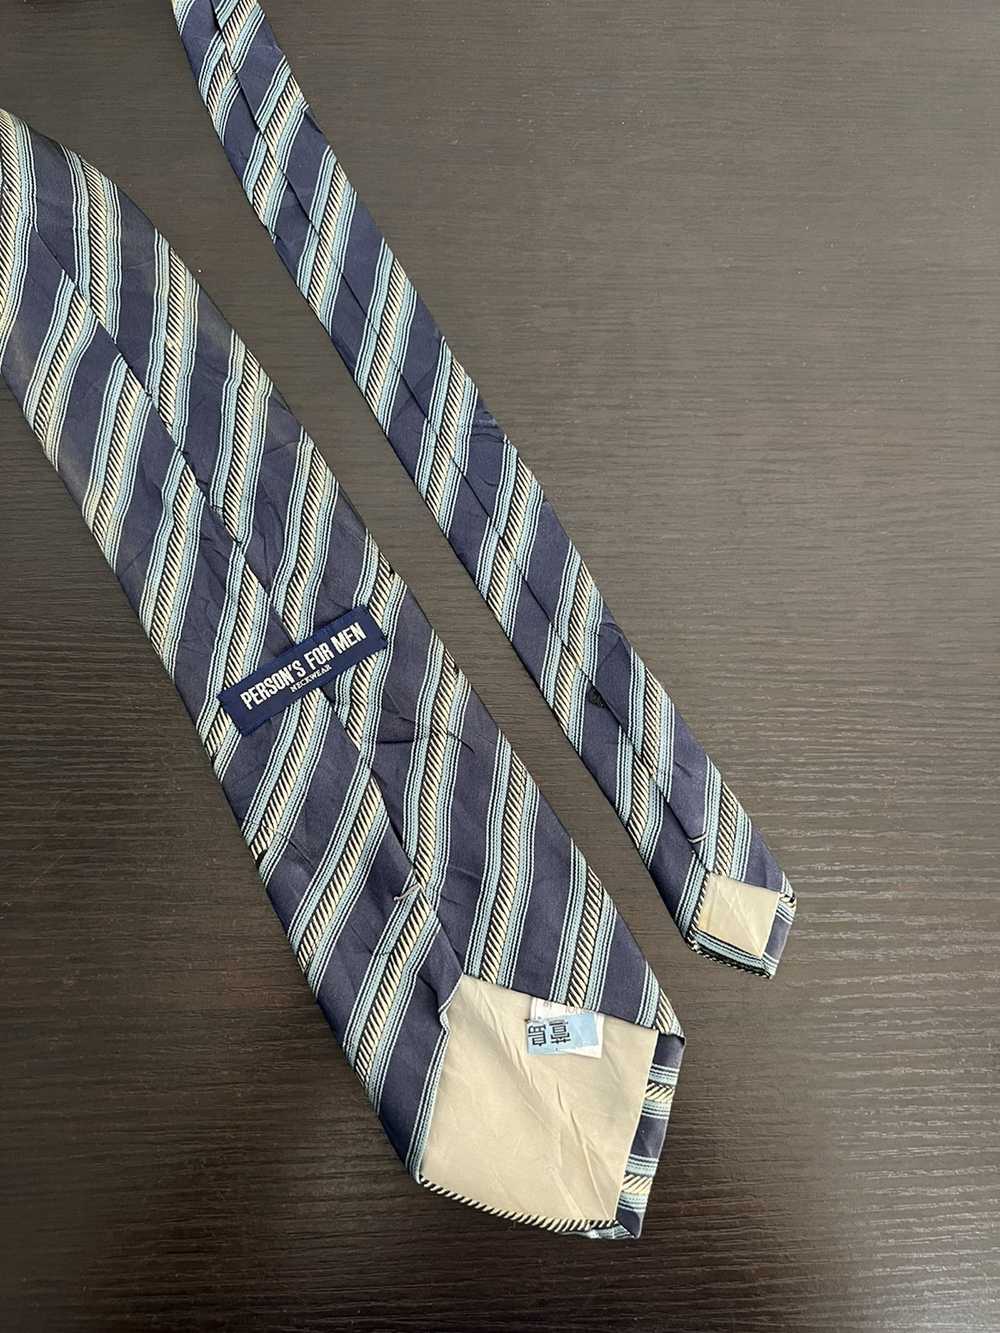 Person's Persons Tie - image 4